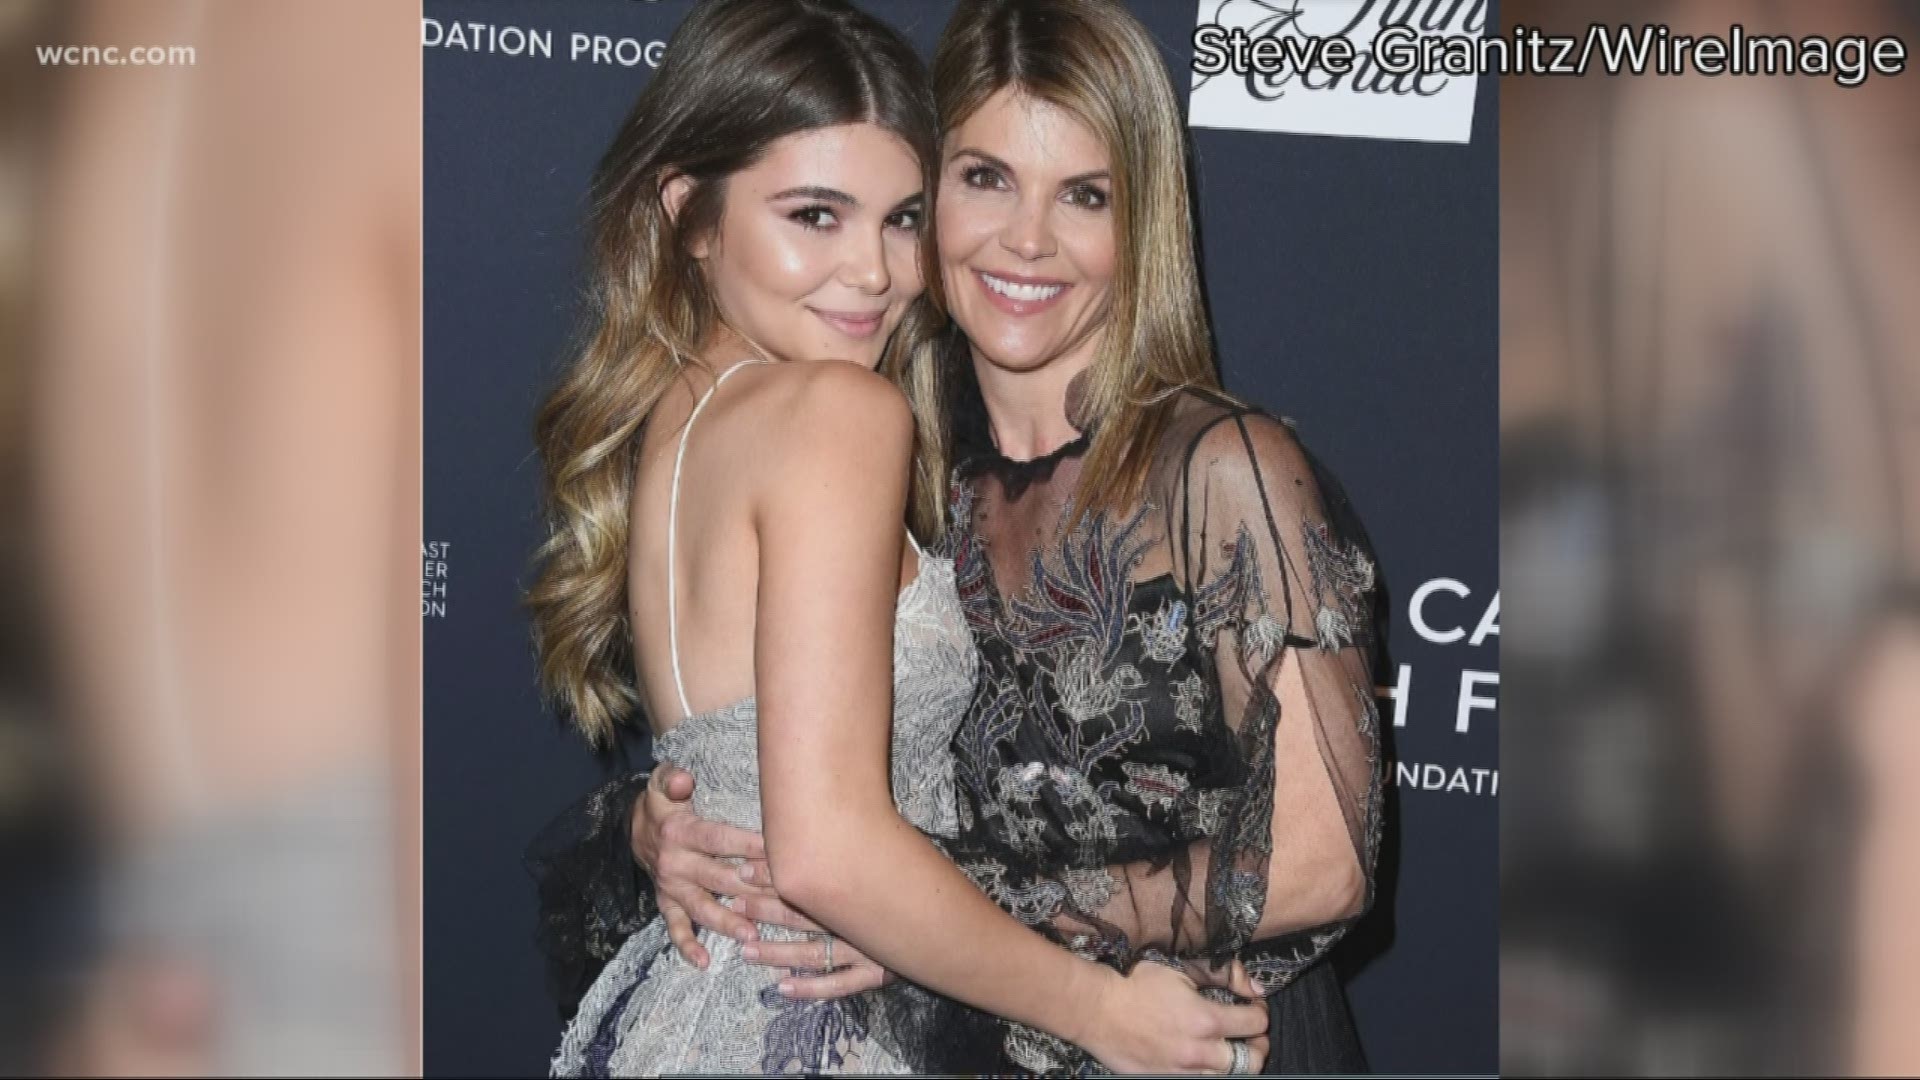 According to a report from "People" magazine, Lori Loughlin's daughter Olivia Jade was on board a yacht owned by the USC Board of Trustees chairman when the college bribery scandal broke. She's could face expulsion from the school.